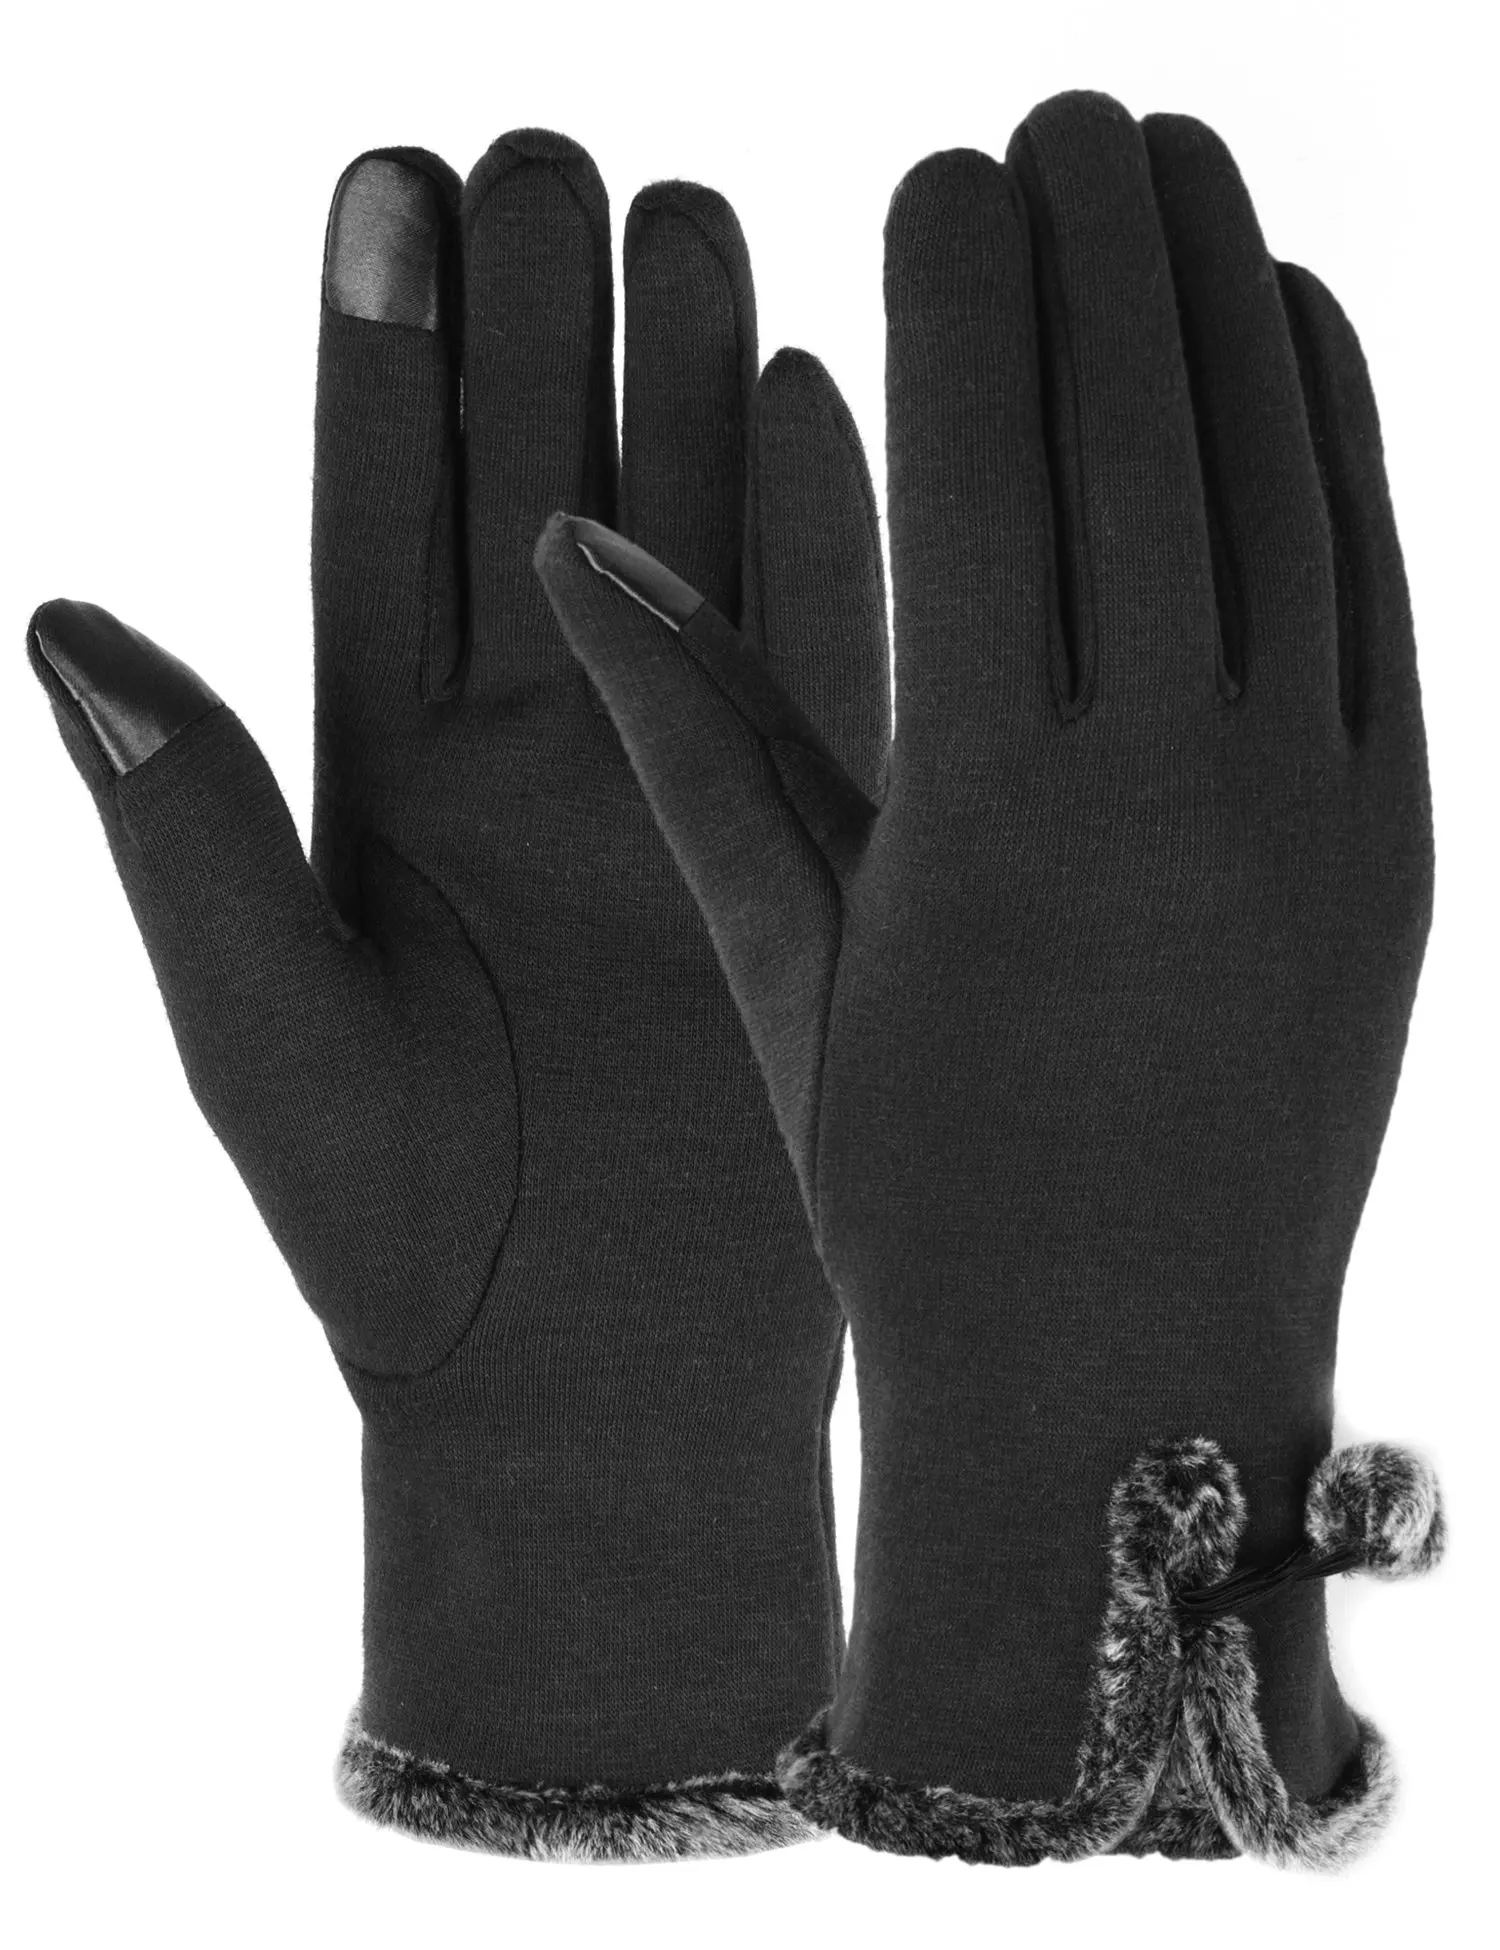 Buy ATIMIGO Womens Touch Screen Gloves Winter Thick Warm Lined Smart ...